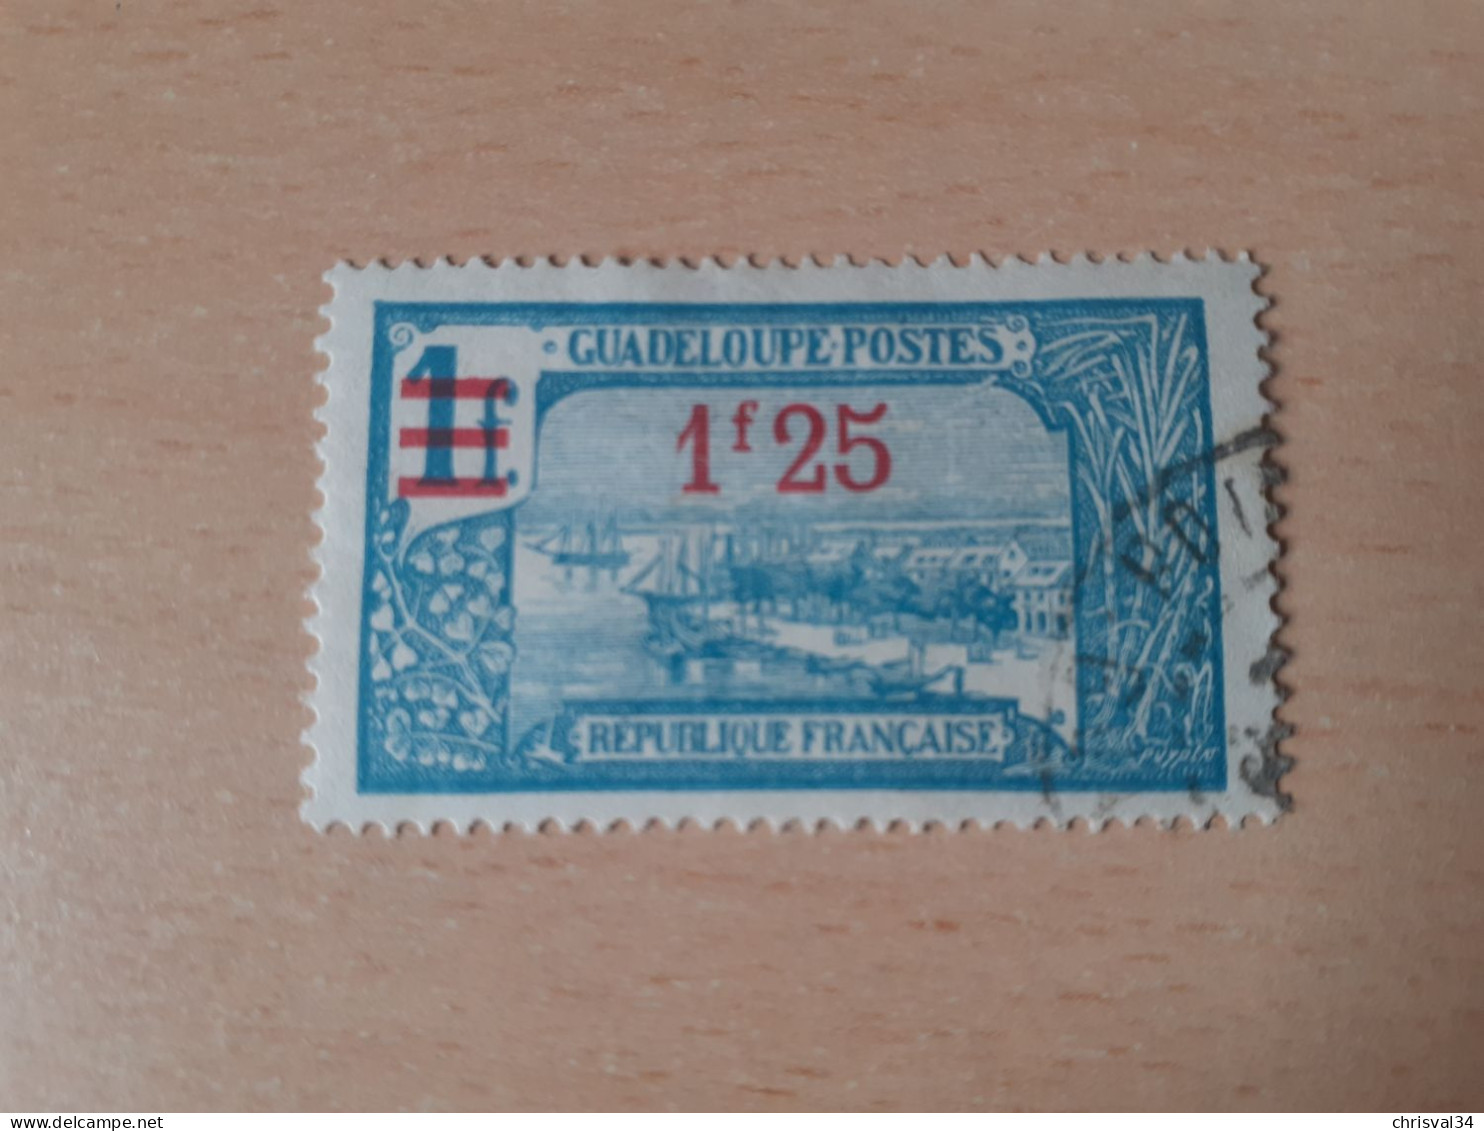 TIMBRE   GUADELOUPE       N  94     COTE  0,75   EUROS  OBLITERE - Gebraucht